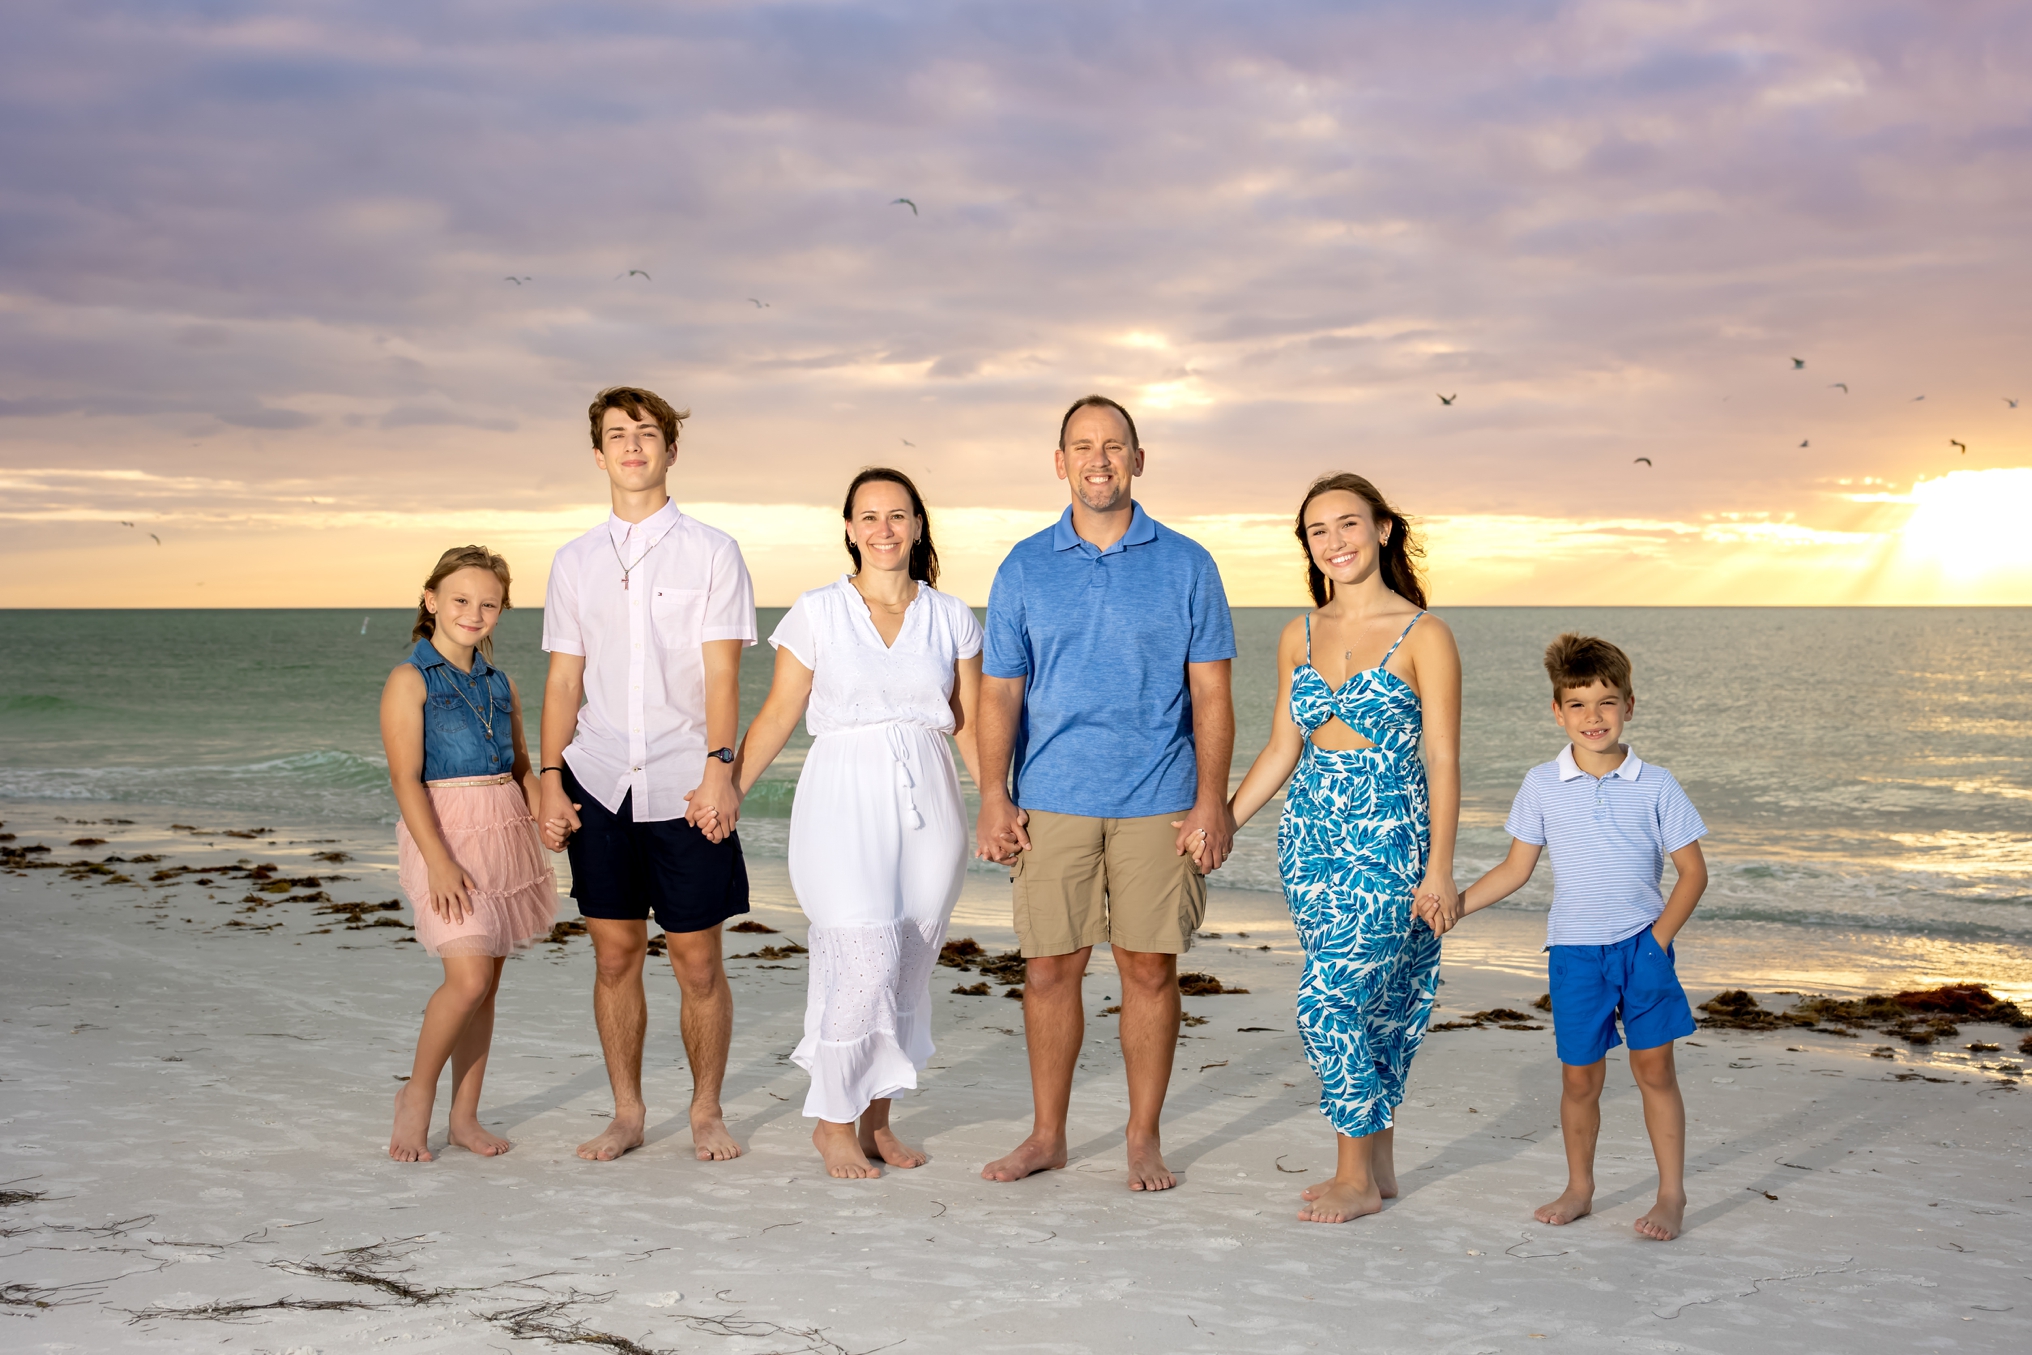 A family of six on the beach holding hands with the sun setting behind them.